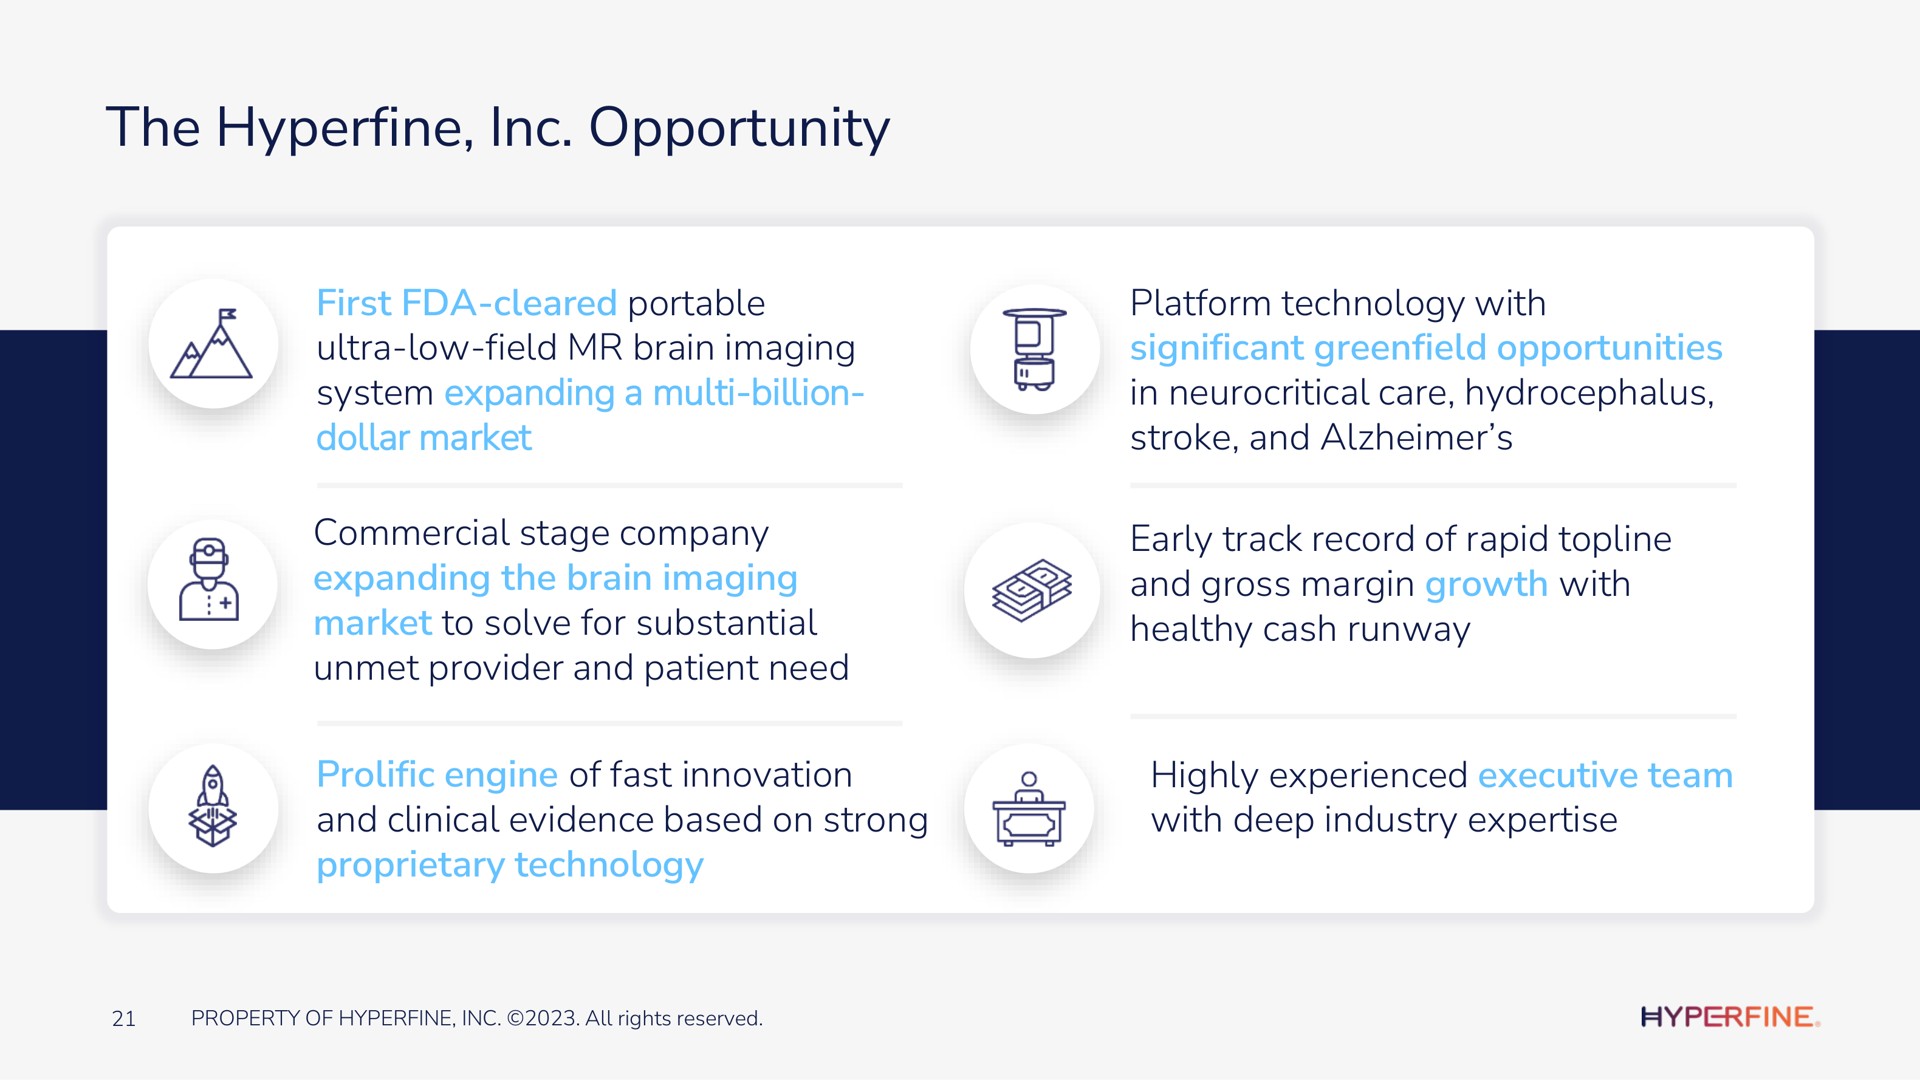 the hyperfine opportunity first cleared portable ultra low field brain imaging system expanding a billion dollar market commercial stage company expanding the brain imaging market to solve for substantial unmet provider and patient need platform technology with significant opportunities in care hydrocephalus stroke and early track record of rapid topline and gross margin growth with healthy cash runway prolific engine of fast innovation and clinical evidence based on strong proprietary technology highly experienced executive team with deep industry | Hyperfine